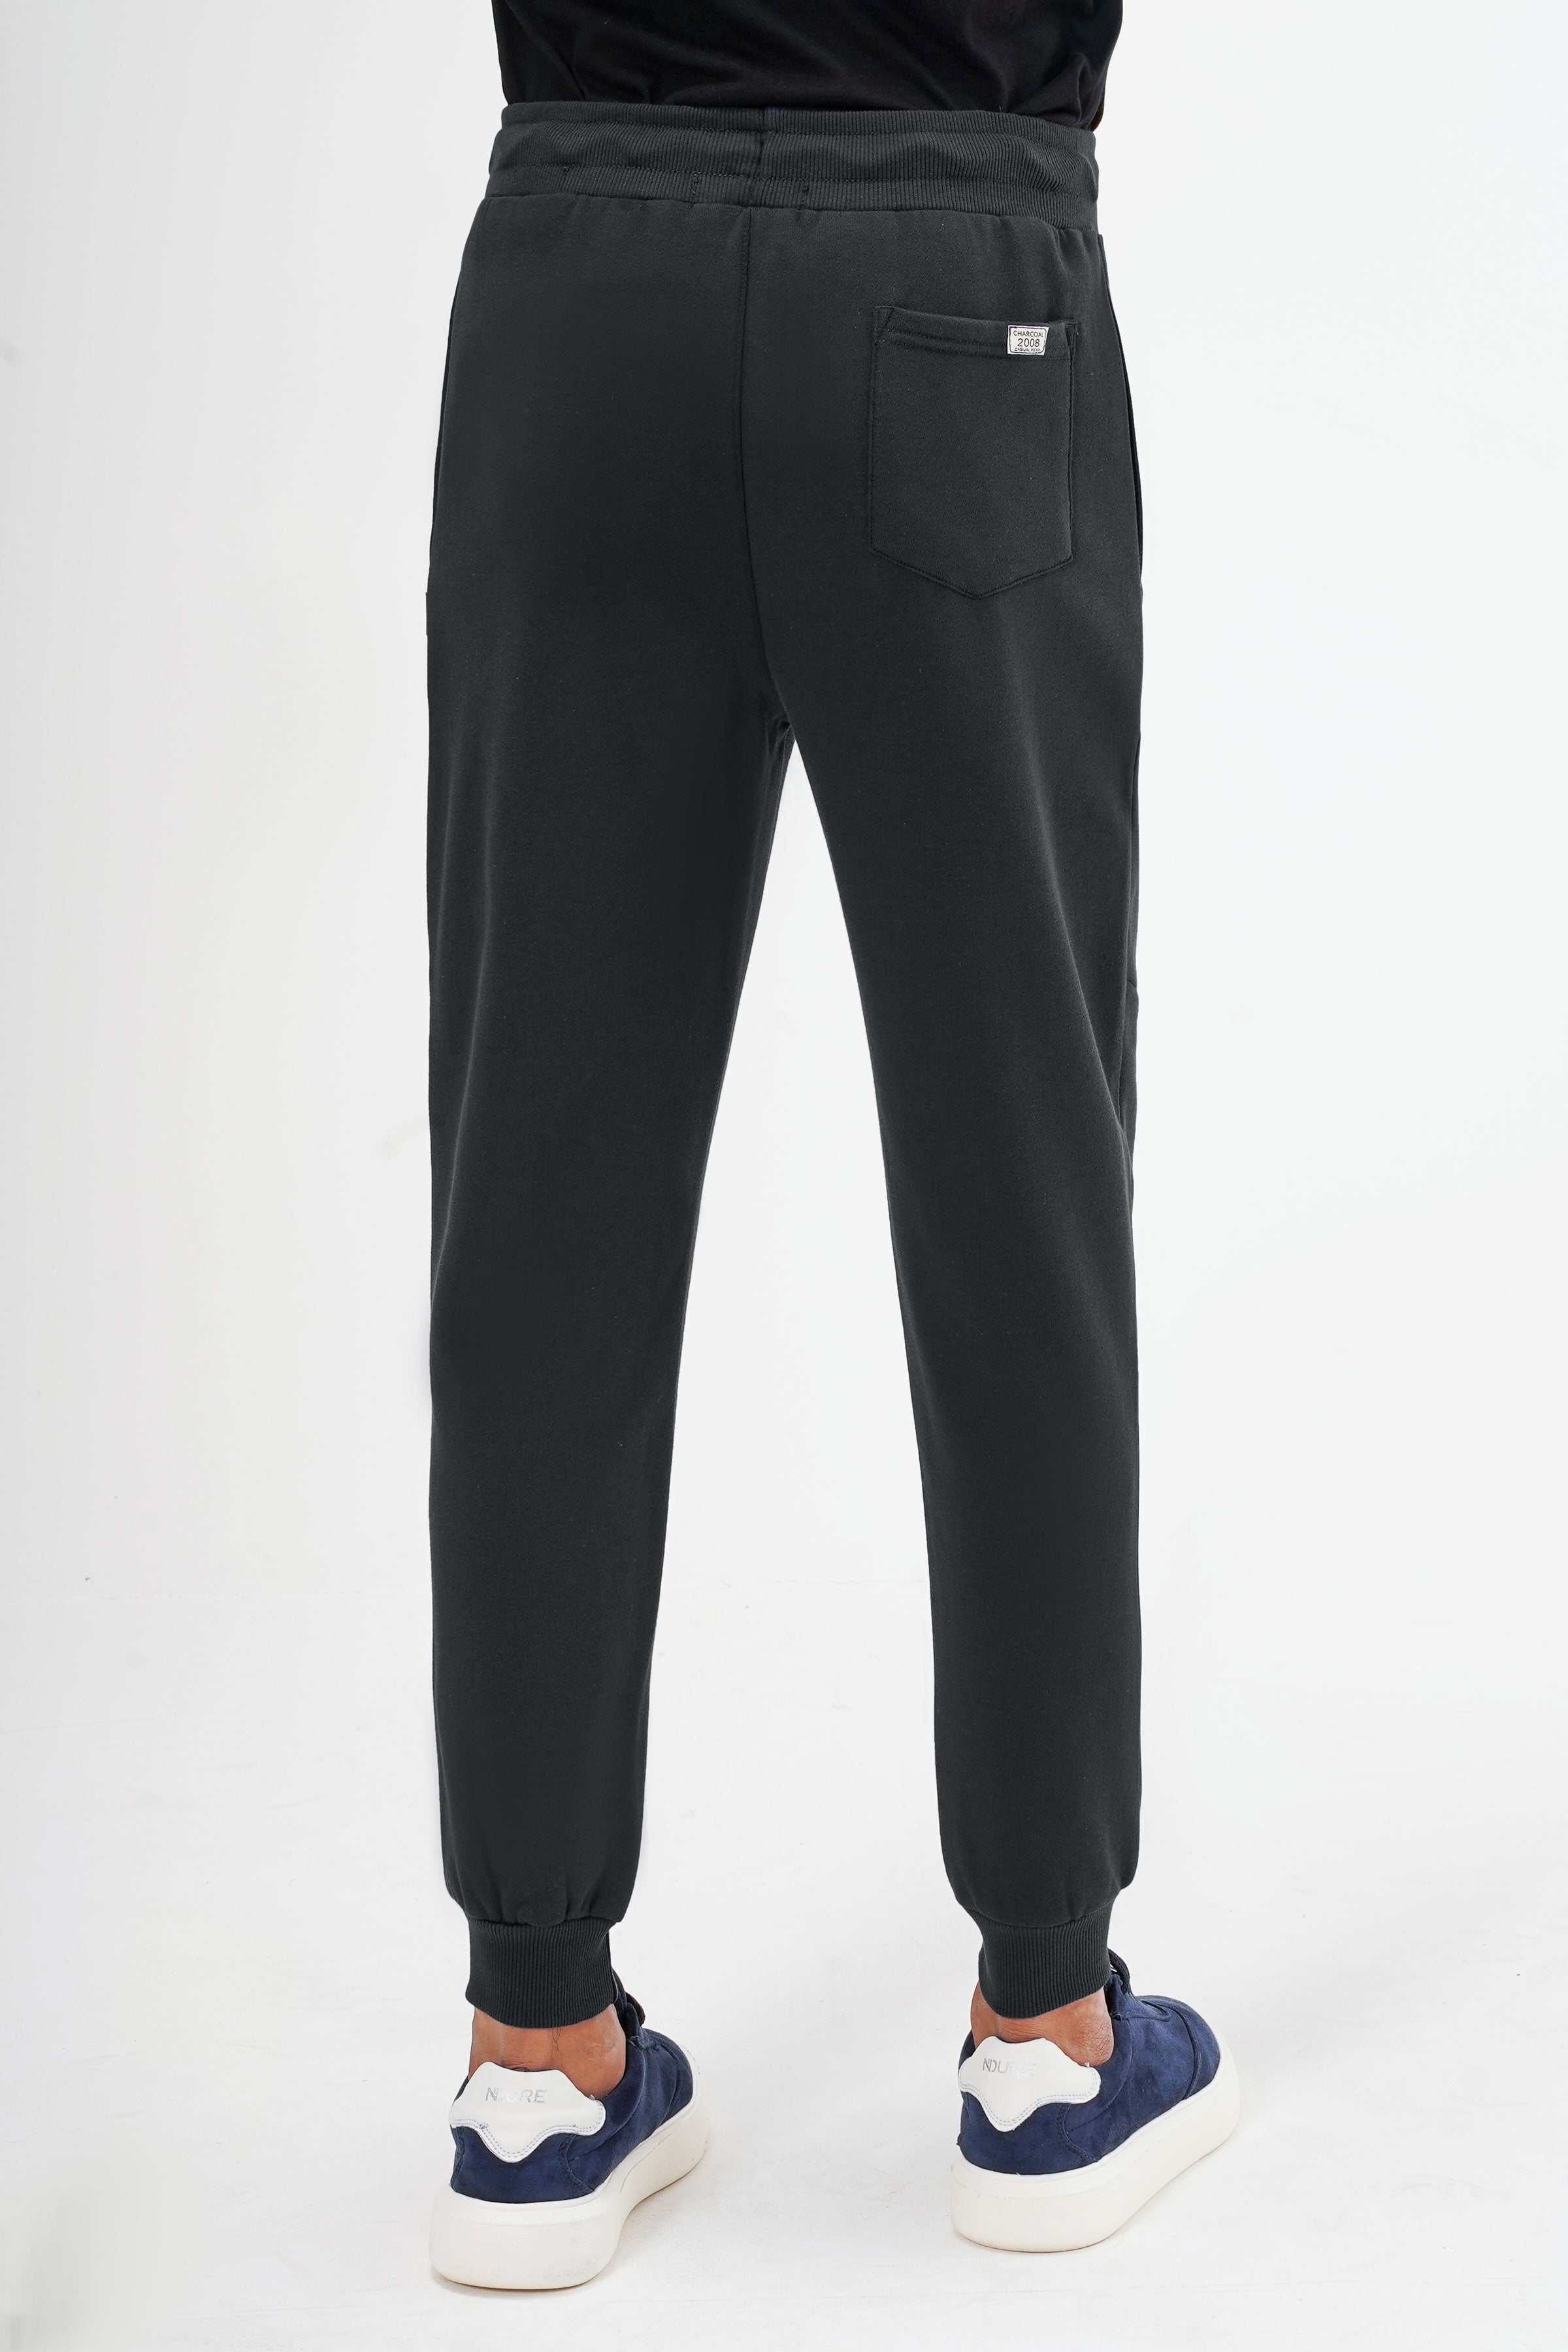 TERRY FLEECE JOGGER TROUSER BLACK at Charcoal Clothing